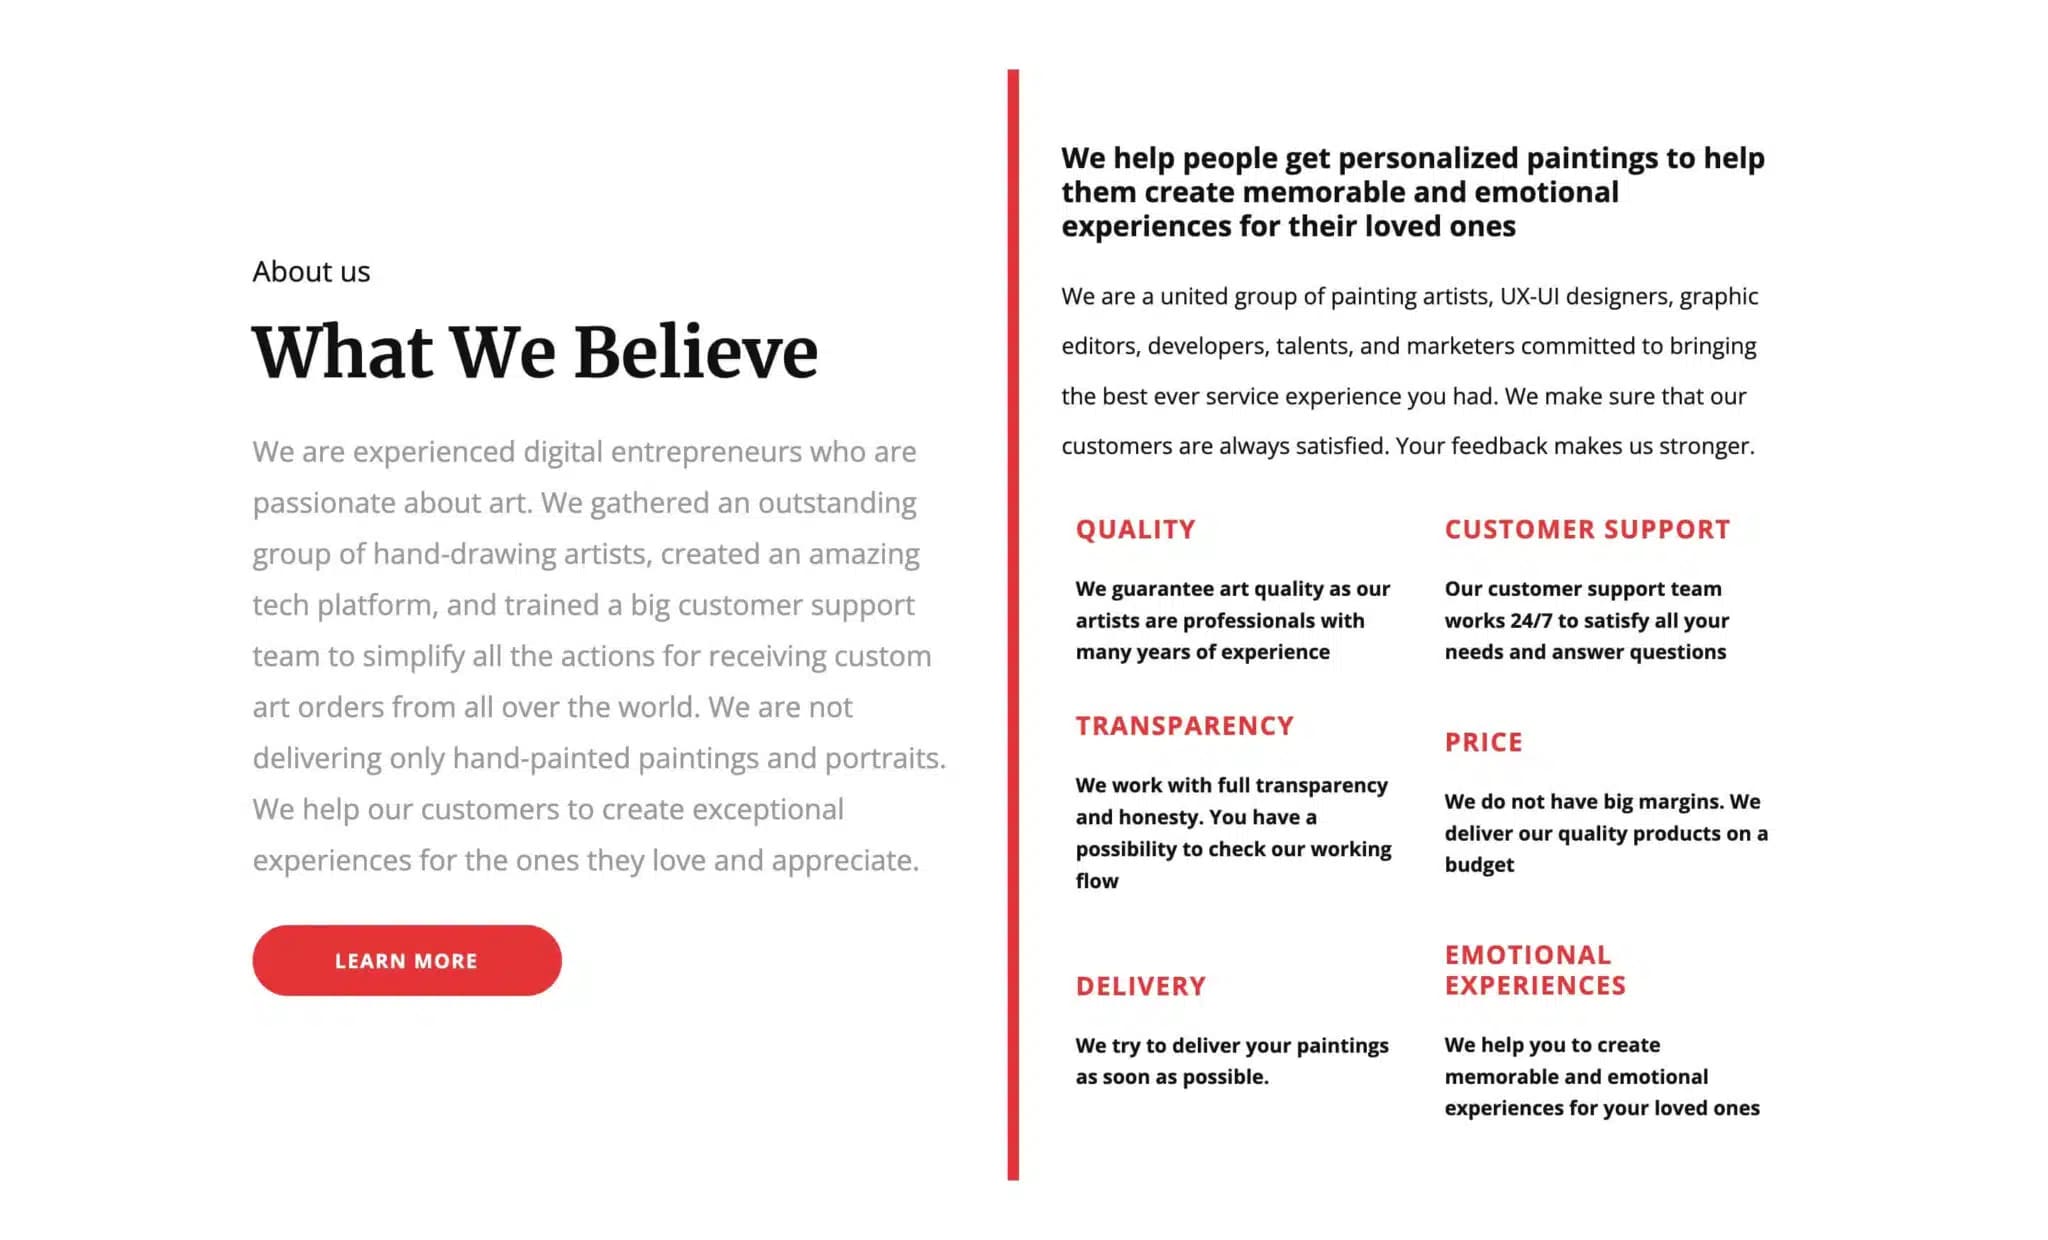 about us believe section